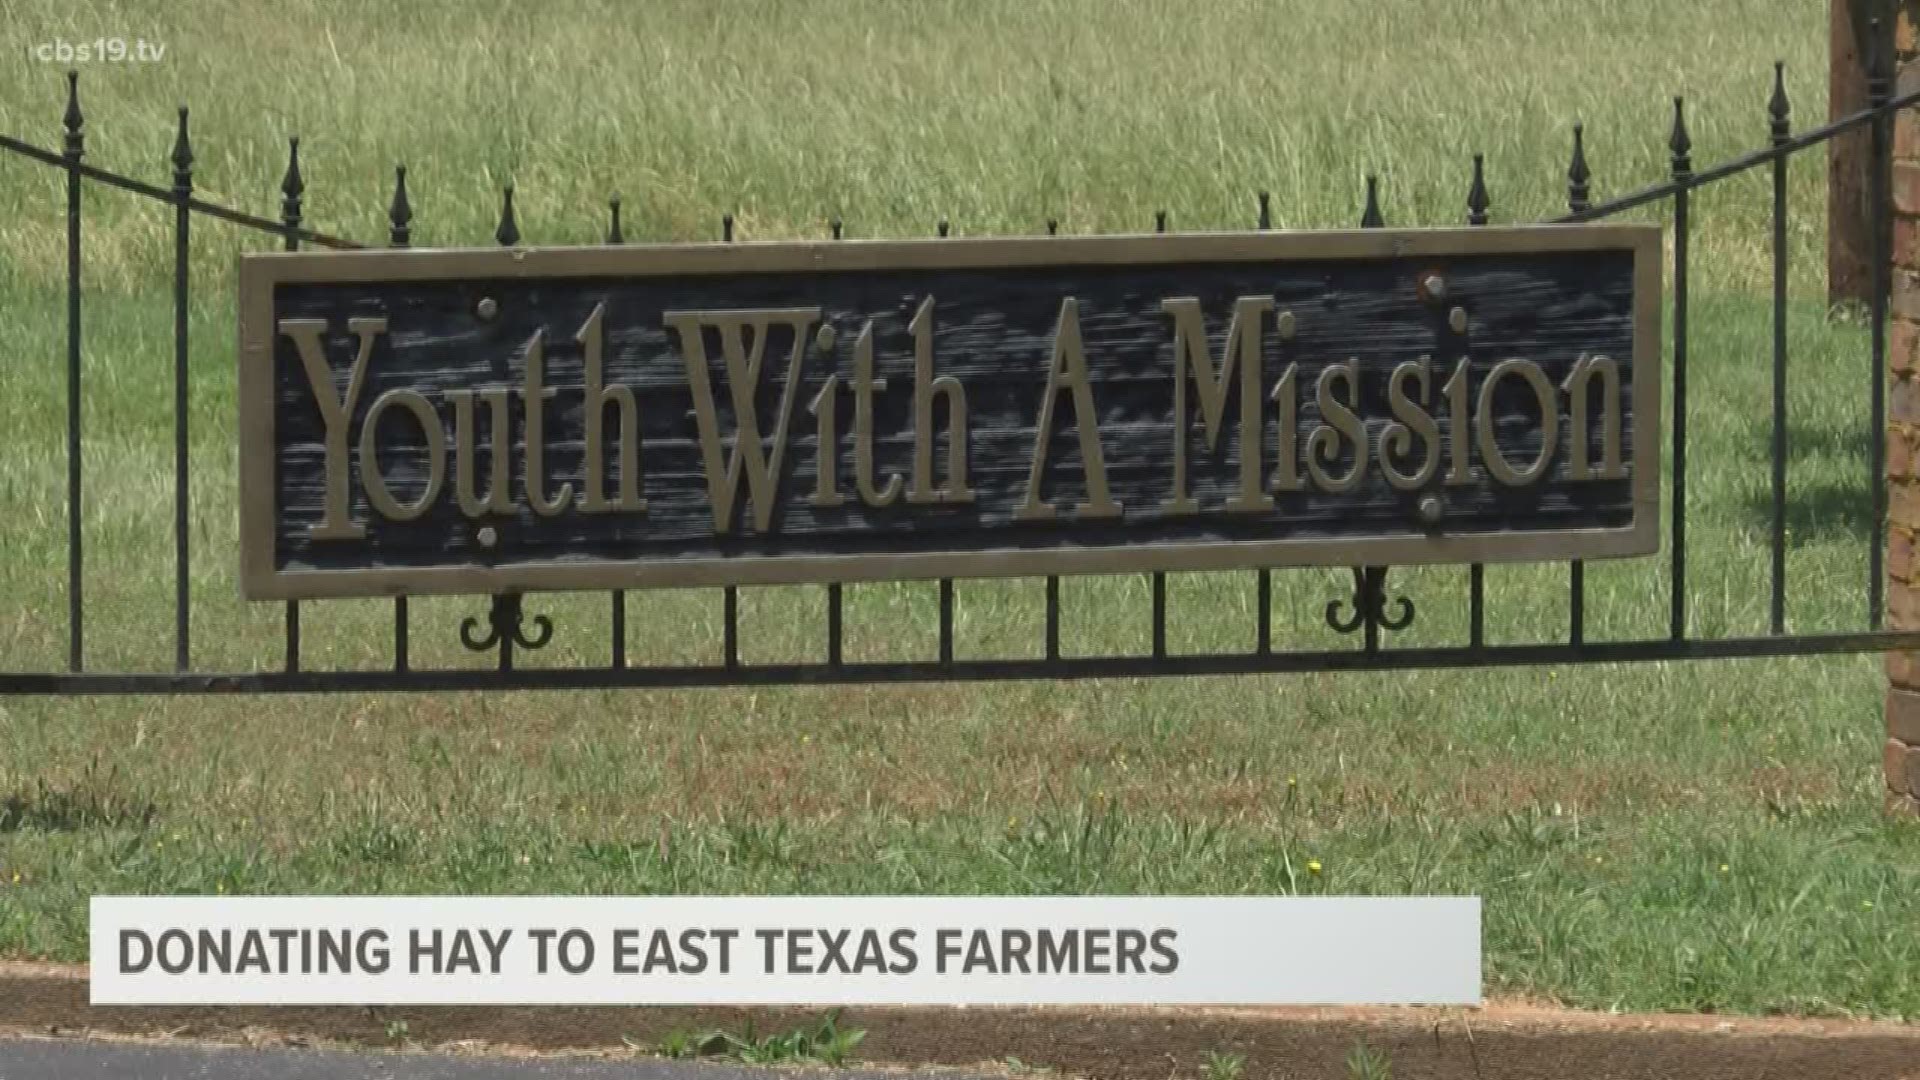 The Lindale-based organization is using more than 200 acres of land to cultivate hay to help East Texas farmers.